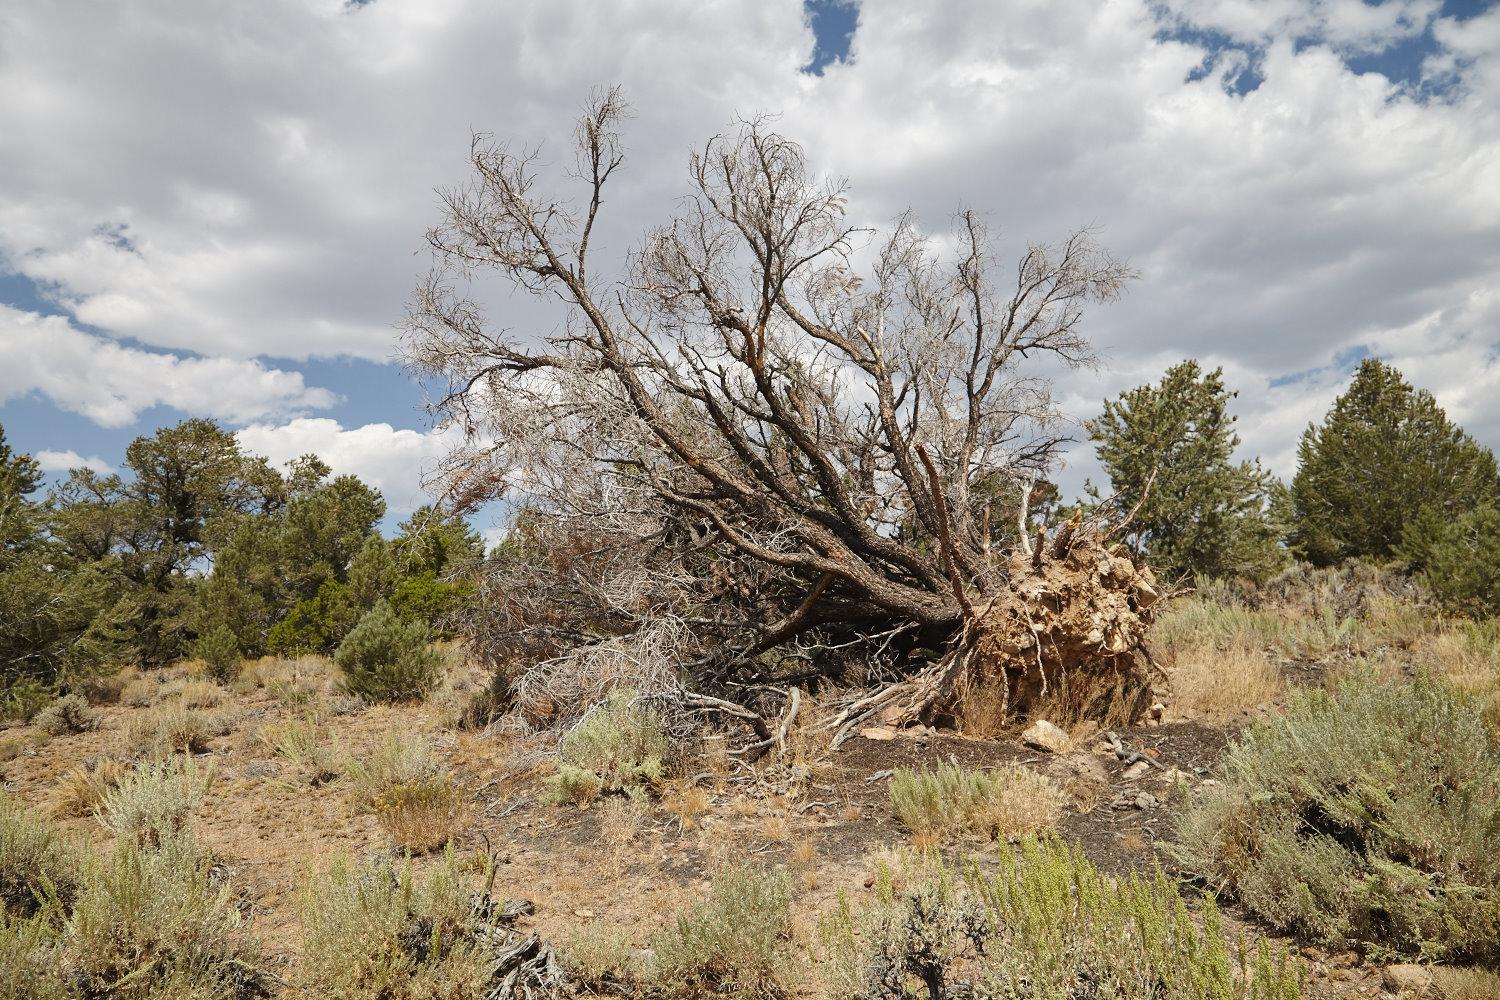 Traditional Shoshone Pine Nut Harvesting in the Age of Climate Change